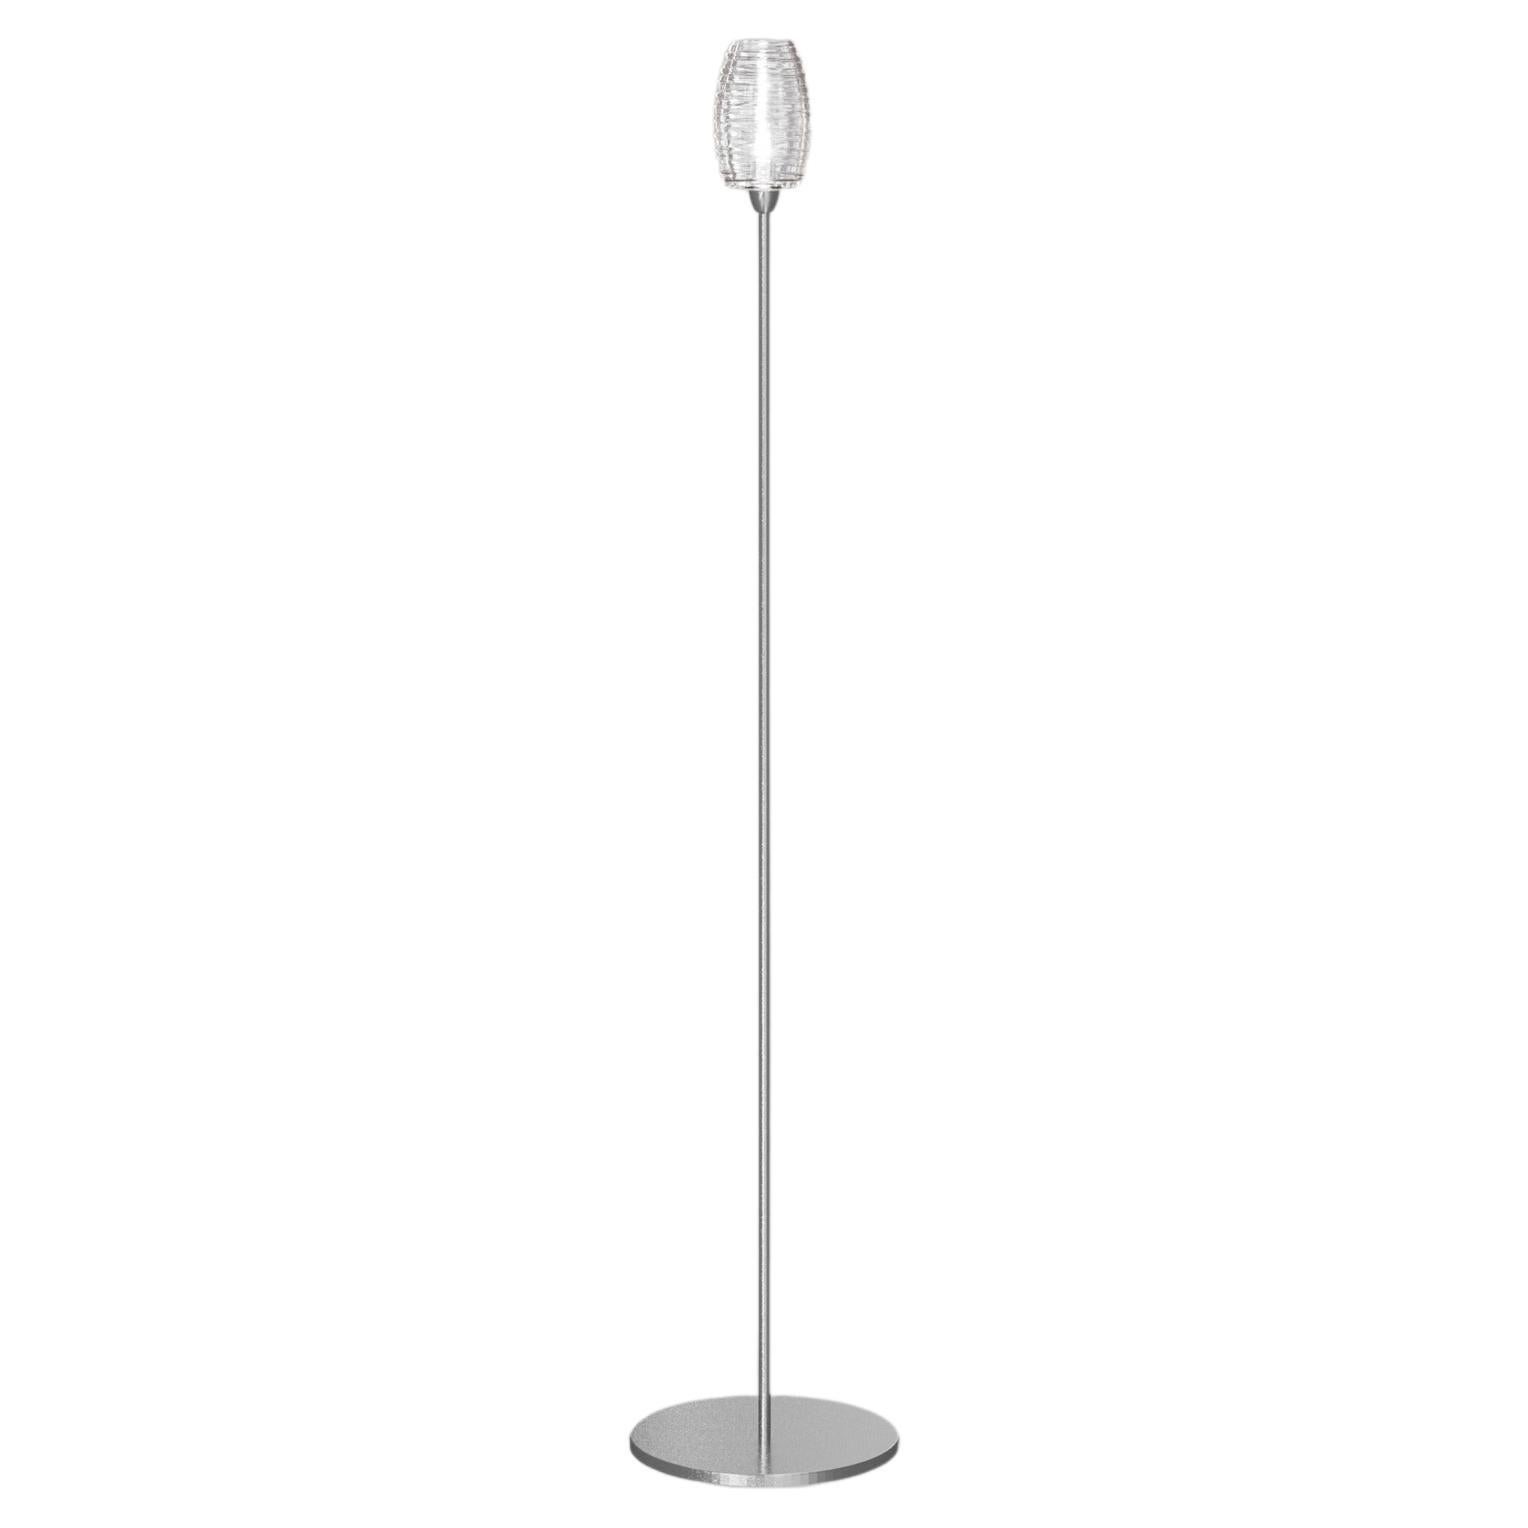 Vistosi Damascus 100 P Floor Lamp in Crystal Crystal by Paolo Crepax For Sale